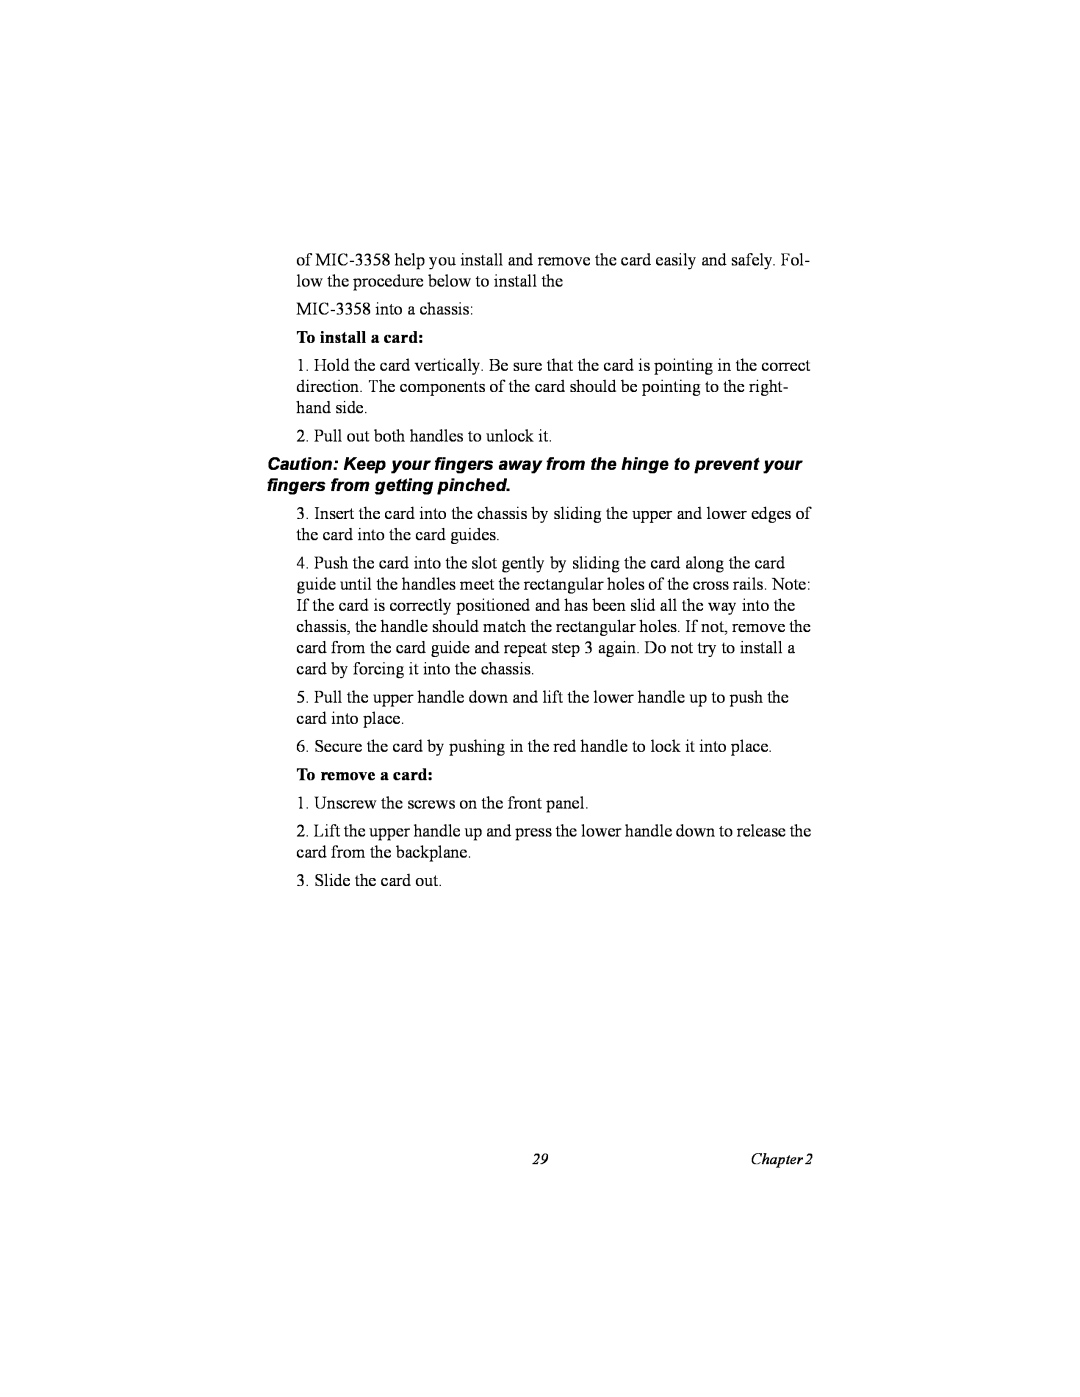 Intel MIC-3358 user manual To install a card, To remove a card 